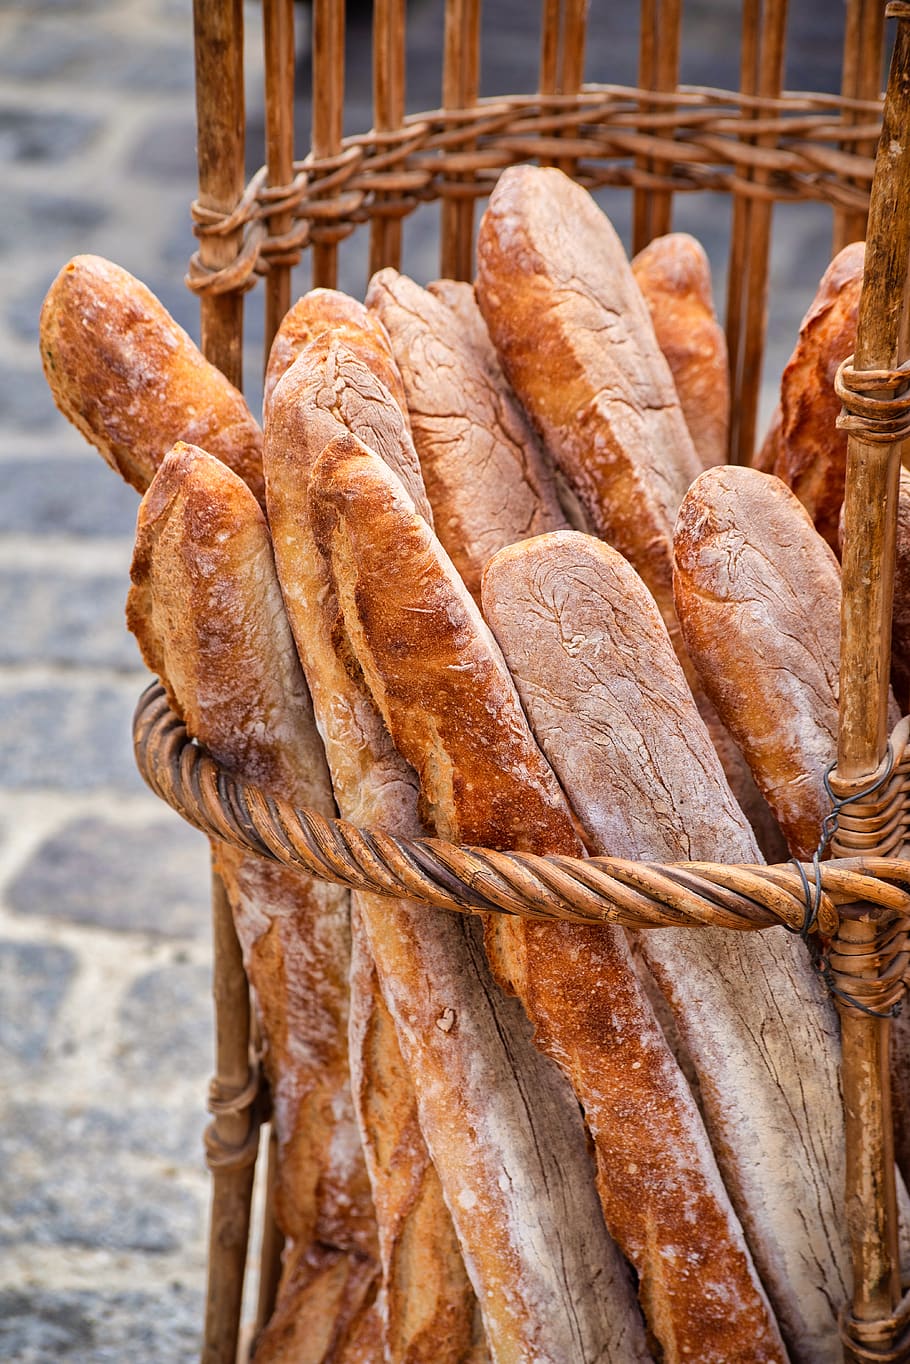 bread, french, baguette, basket, wicker, food, food and drink, freshness, close-up, focus on foreground